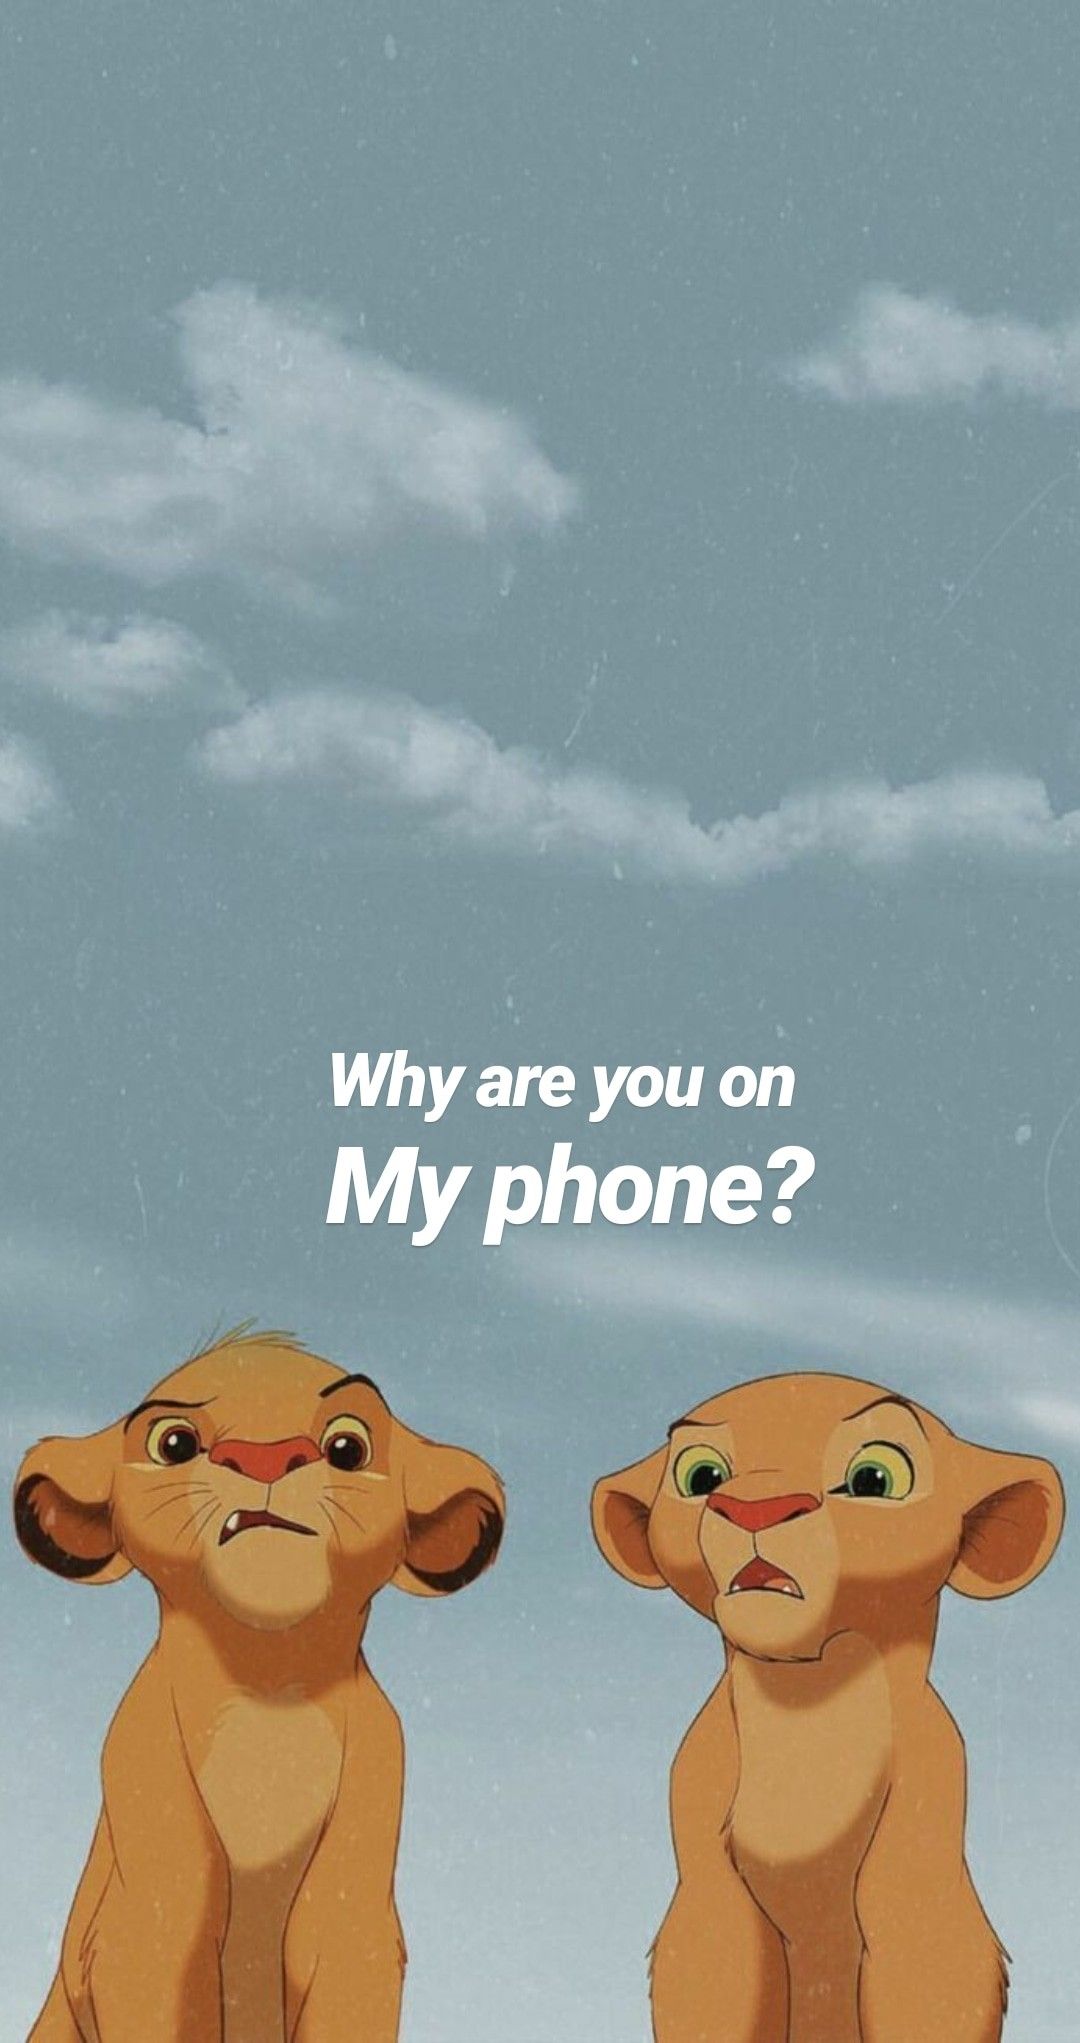 Lion King Wallpaper Why Are You On My Phone - HD Wallpaper 